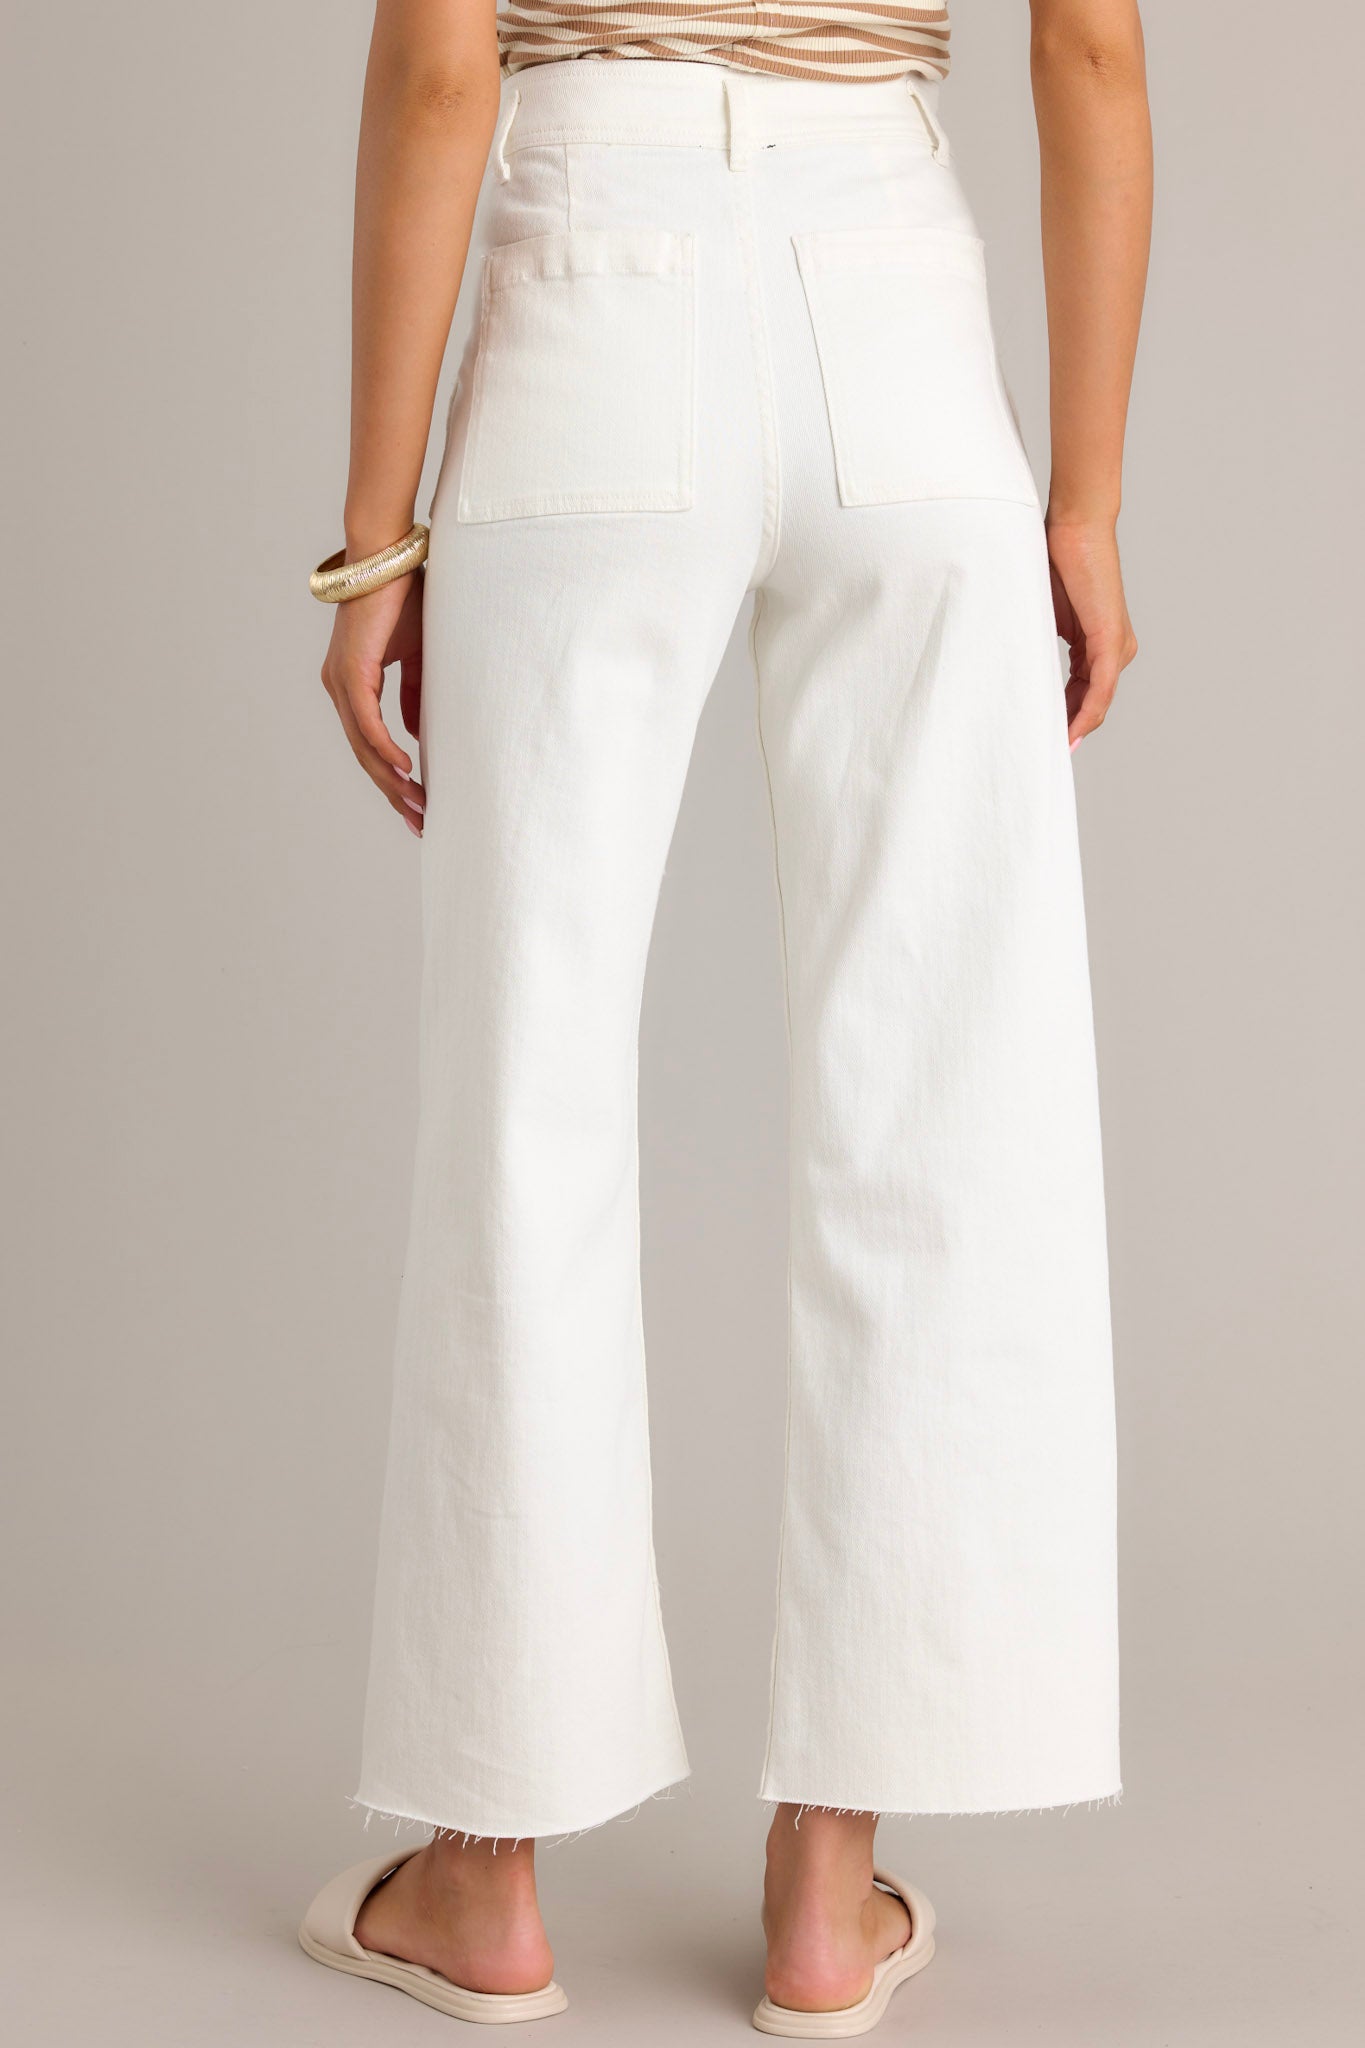 Back view of white jeans featuring functional back pockets, belt loops, and a wide leg design.